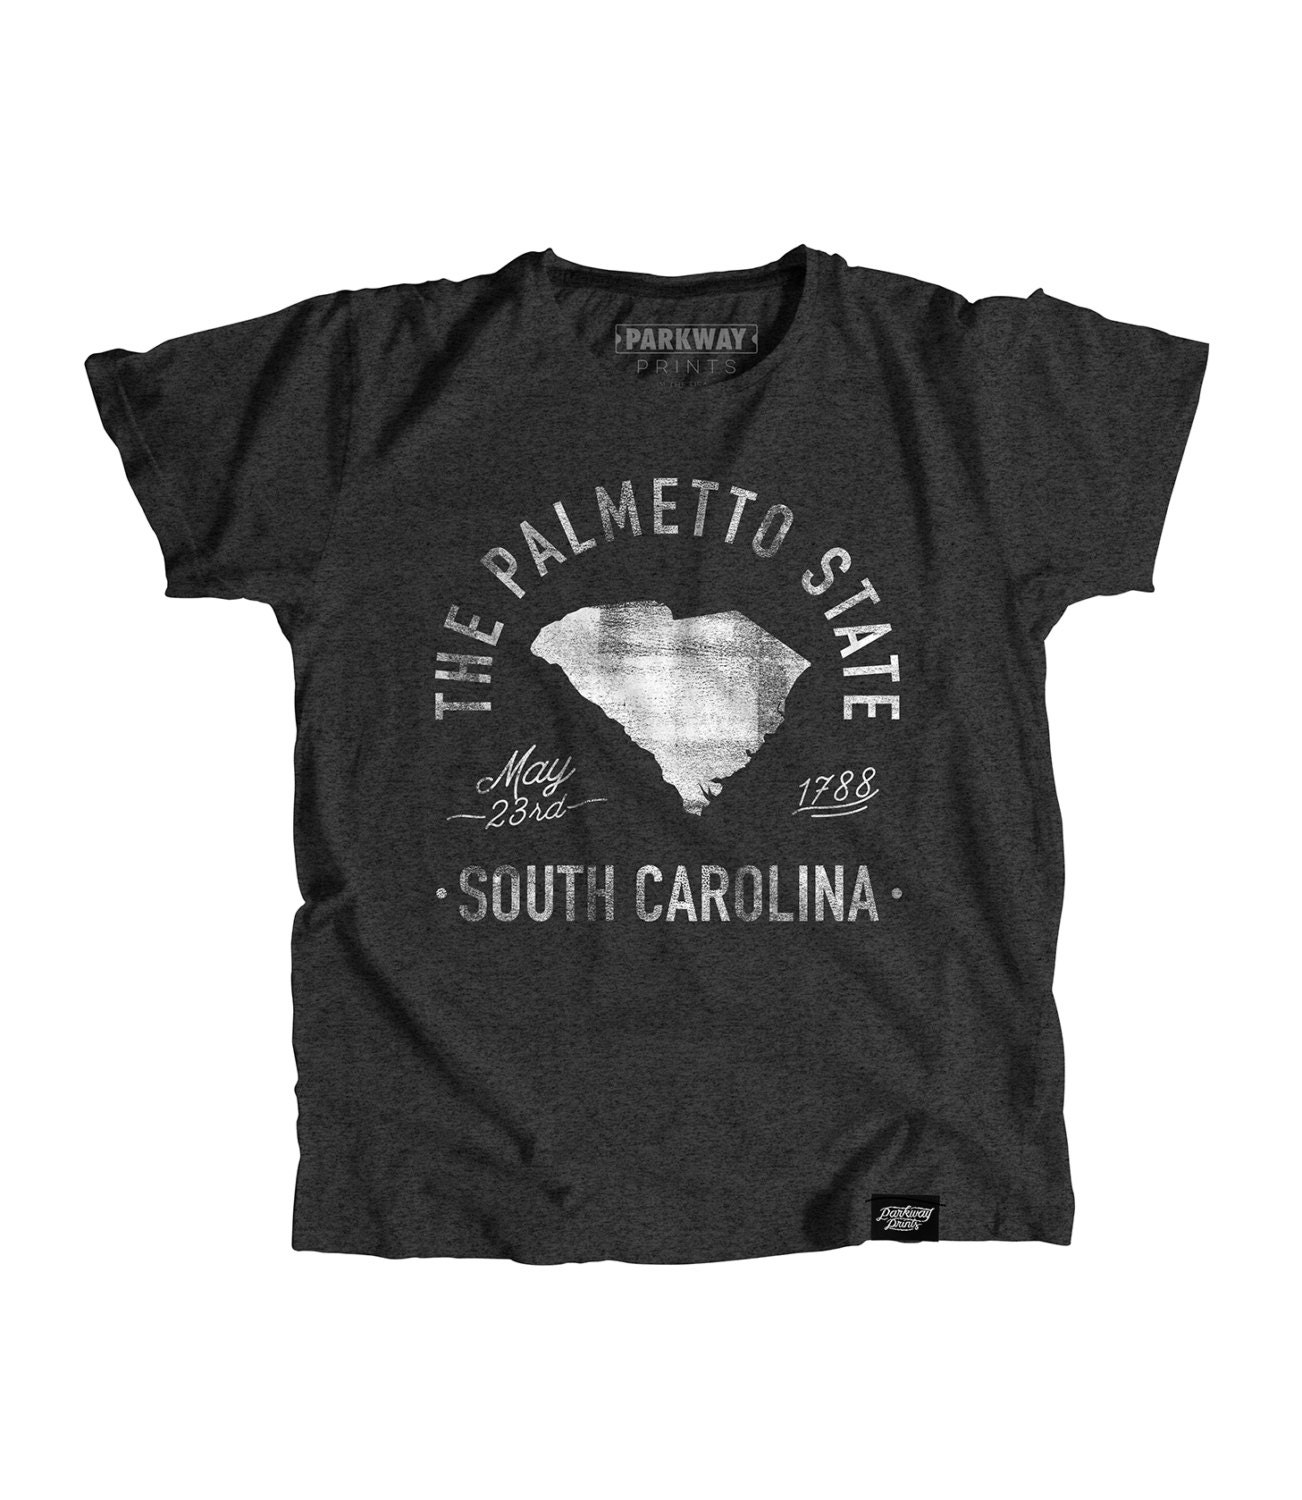 State of South Carolina Motto Youth Shirt by ParkwayPrints on Etsy